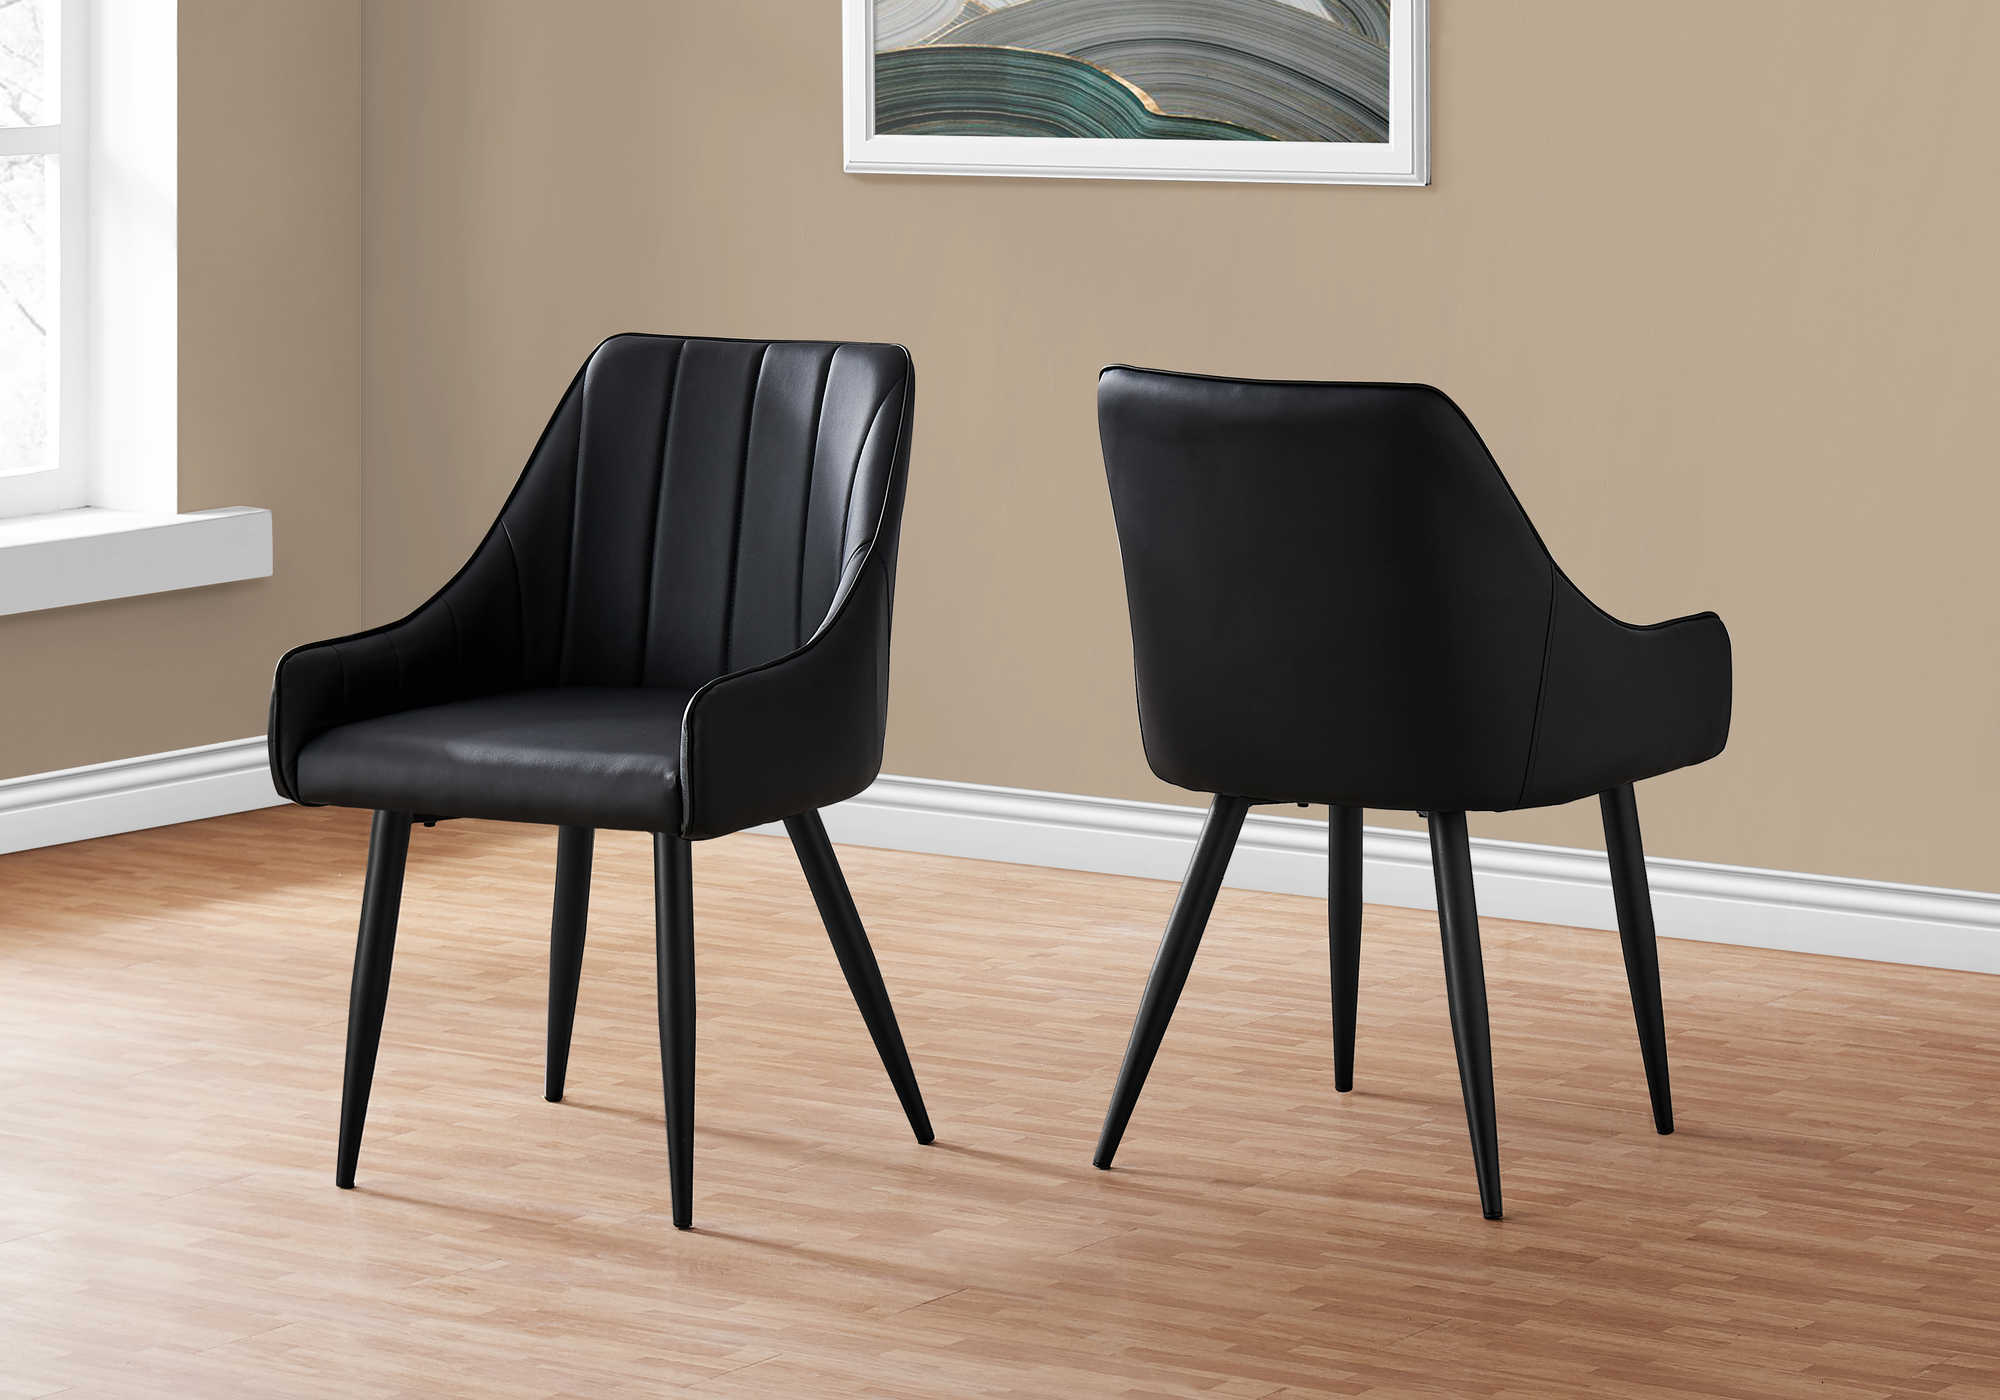 DINING CHAIR - 2PCS / 33"H / BLACK LEATHER-LOOK / BLACK